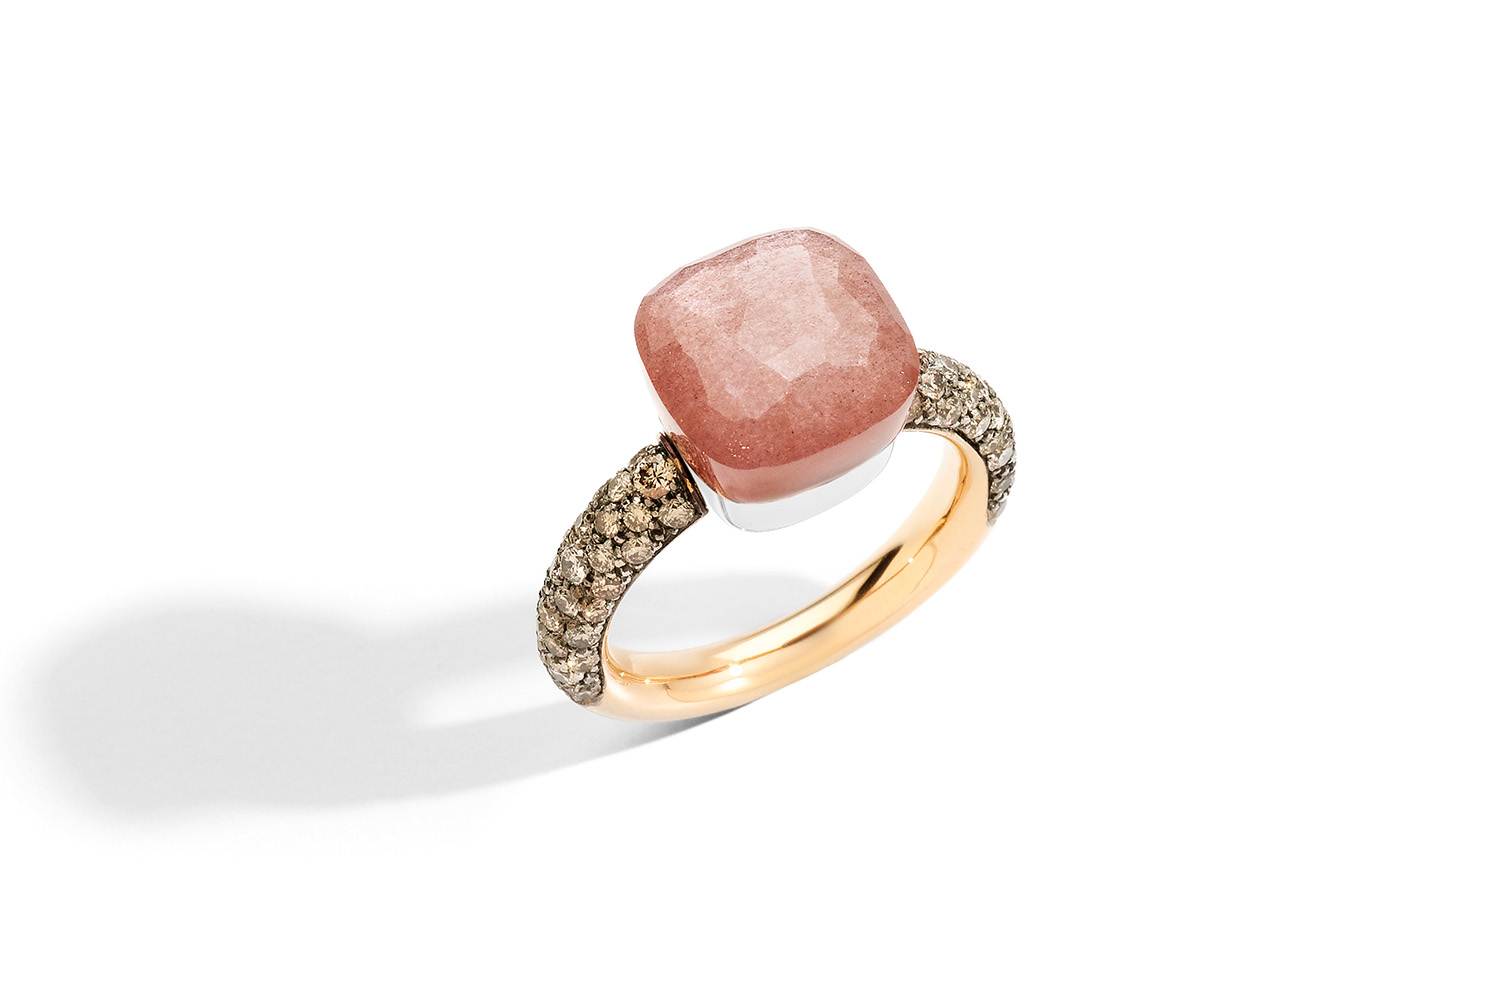 NUDO-CHOCOLATE-classic-ring-in-rose-gold-with-orange-moonstone-and-brown-diamonds-by-Pomellato-–-kopia